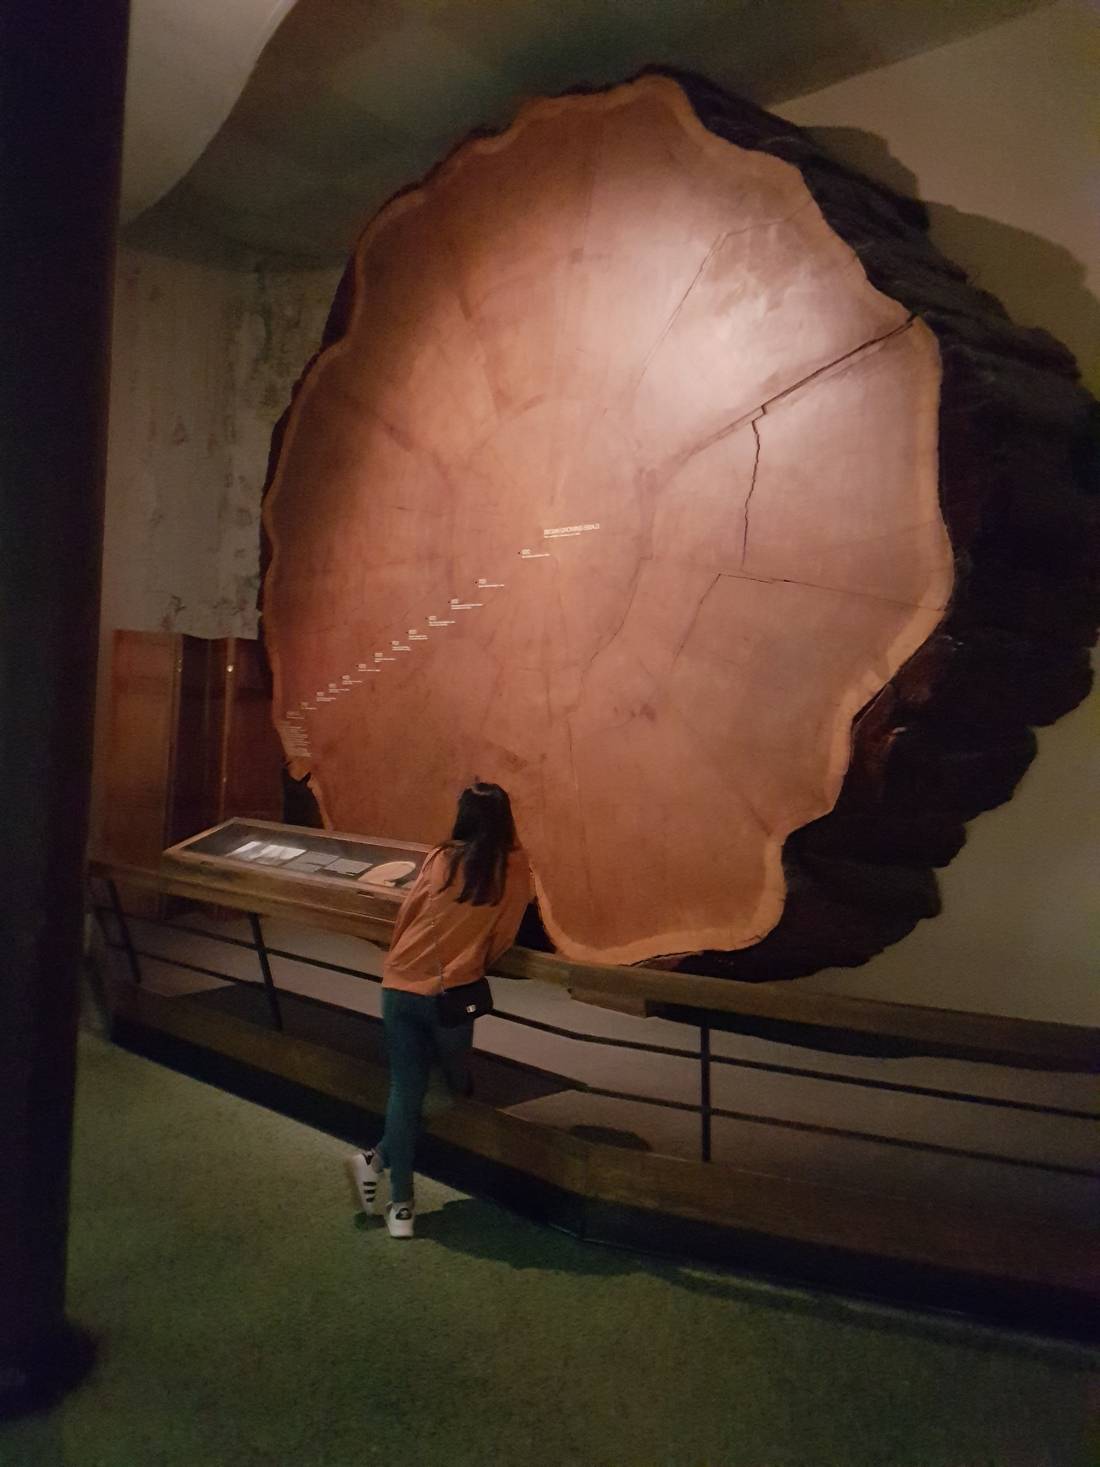 This is a piece out of the trunk of a Giant Sequoia Tree. It shows 1400 years worth of growth. The tree was over 90 metres tall before it was felled. After this beauty was cut down, the next president passed a law to say these trees had to be protected.